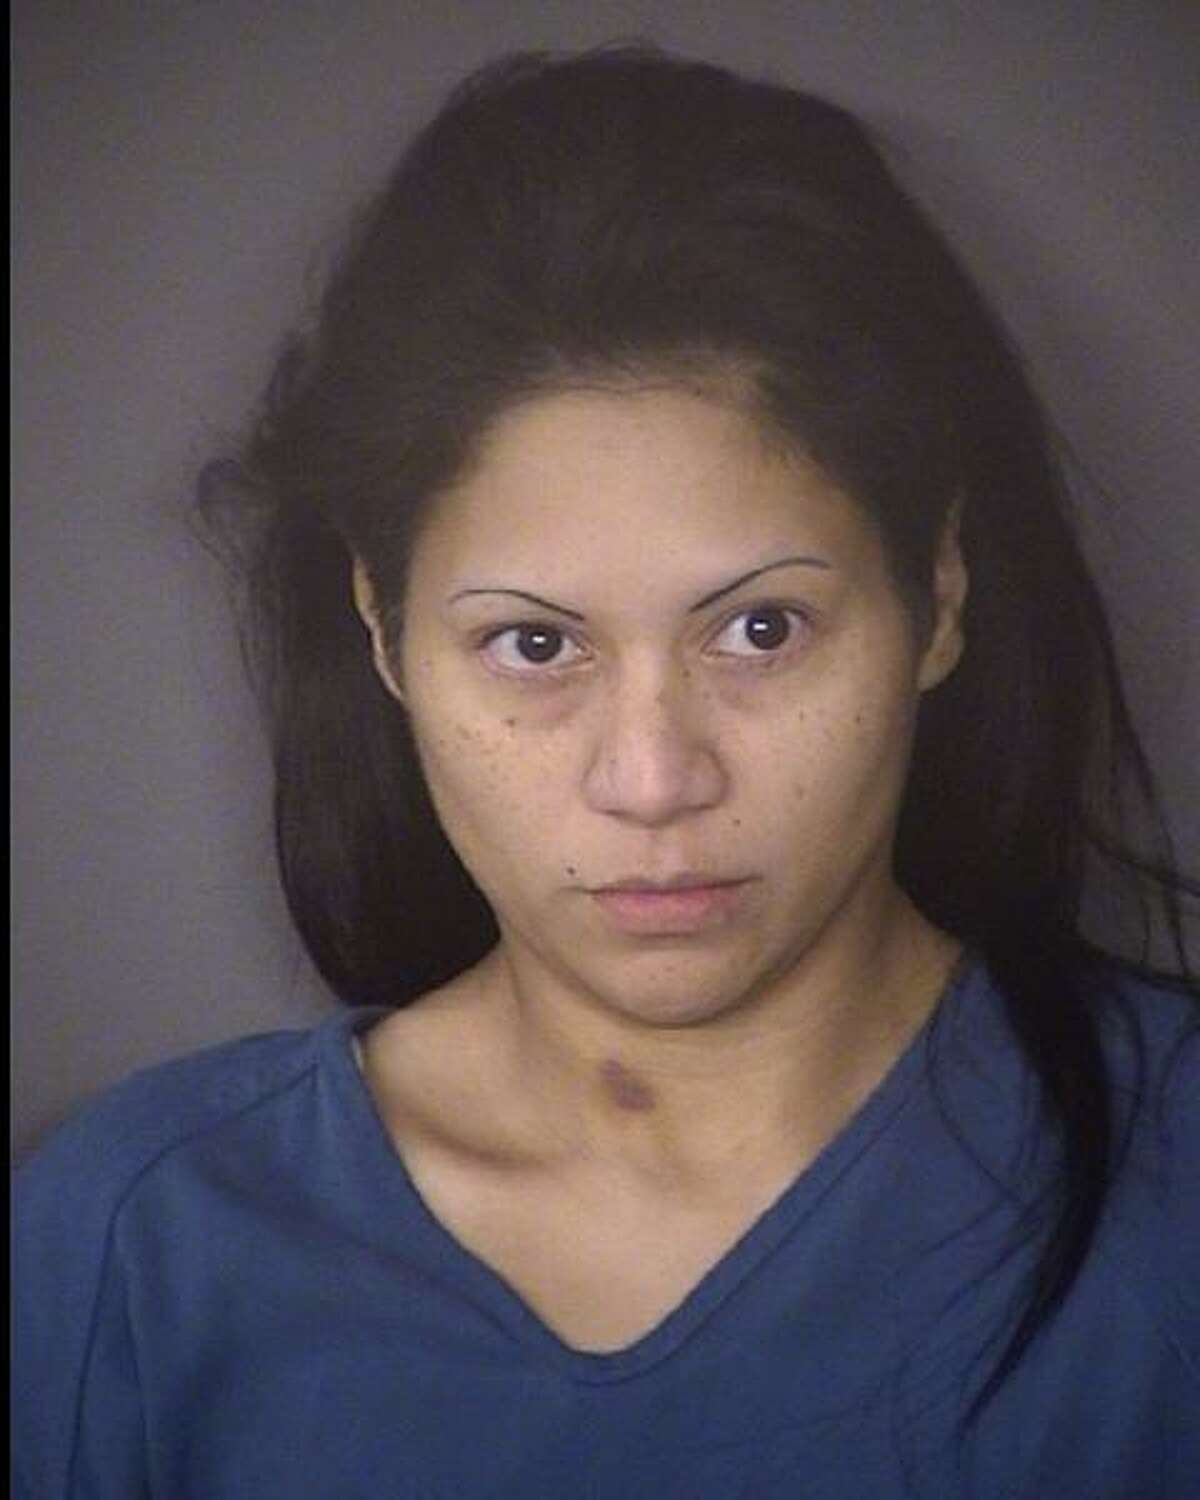 Victoria Ochoa, 36, was charged with one count of altering, destroying or concealing a human corpse after she told investigators she flushed her baby down the toilet after having a miscarriage earlier this month. Investigators say her story doesn’t add up.